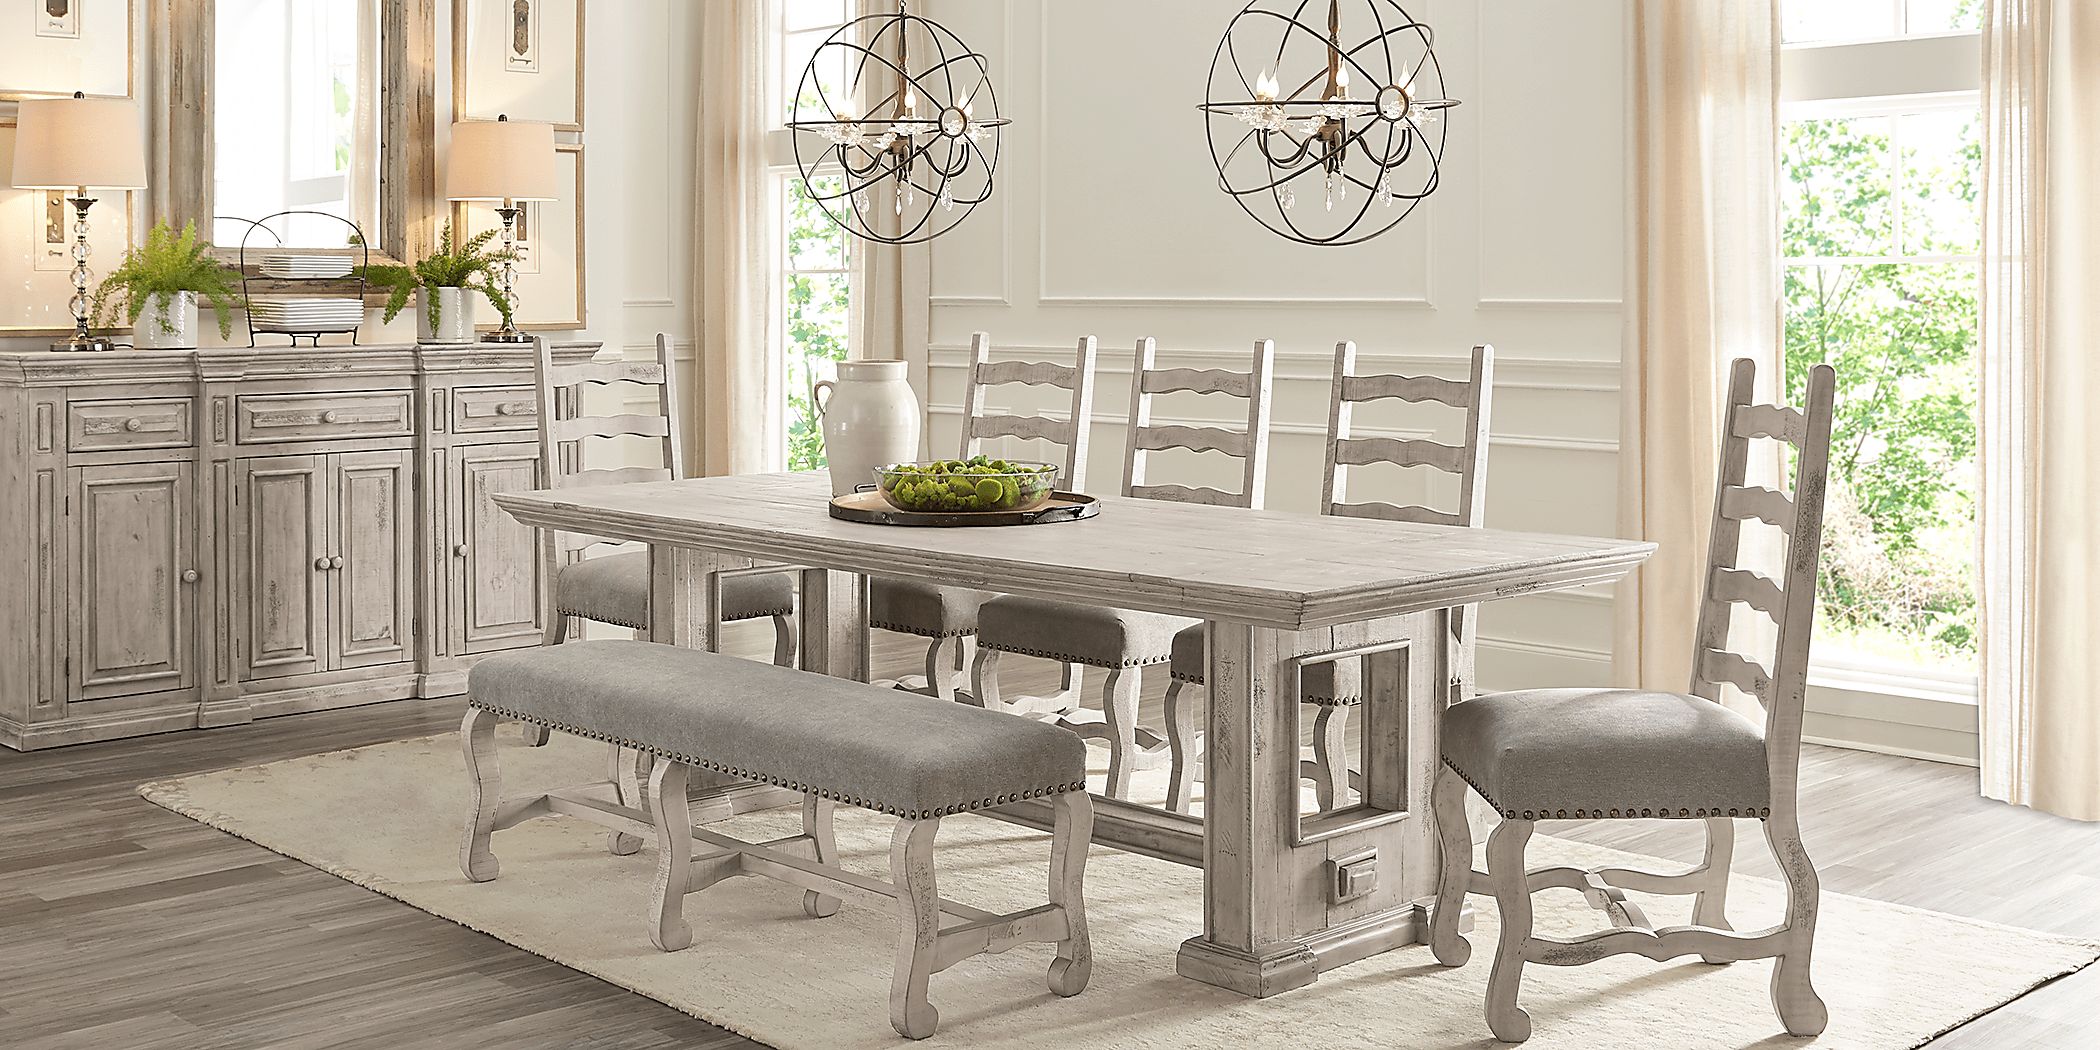 Rooms To Go Cindy Crawford Dining Room Table